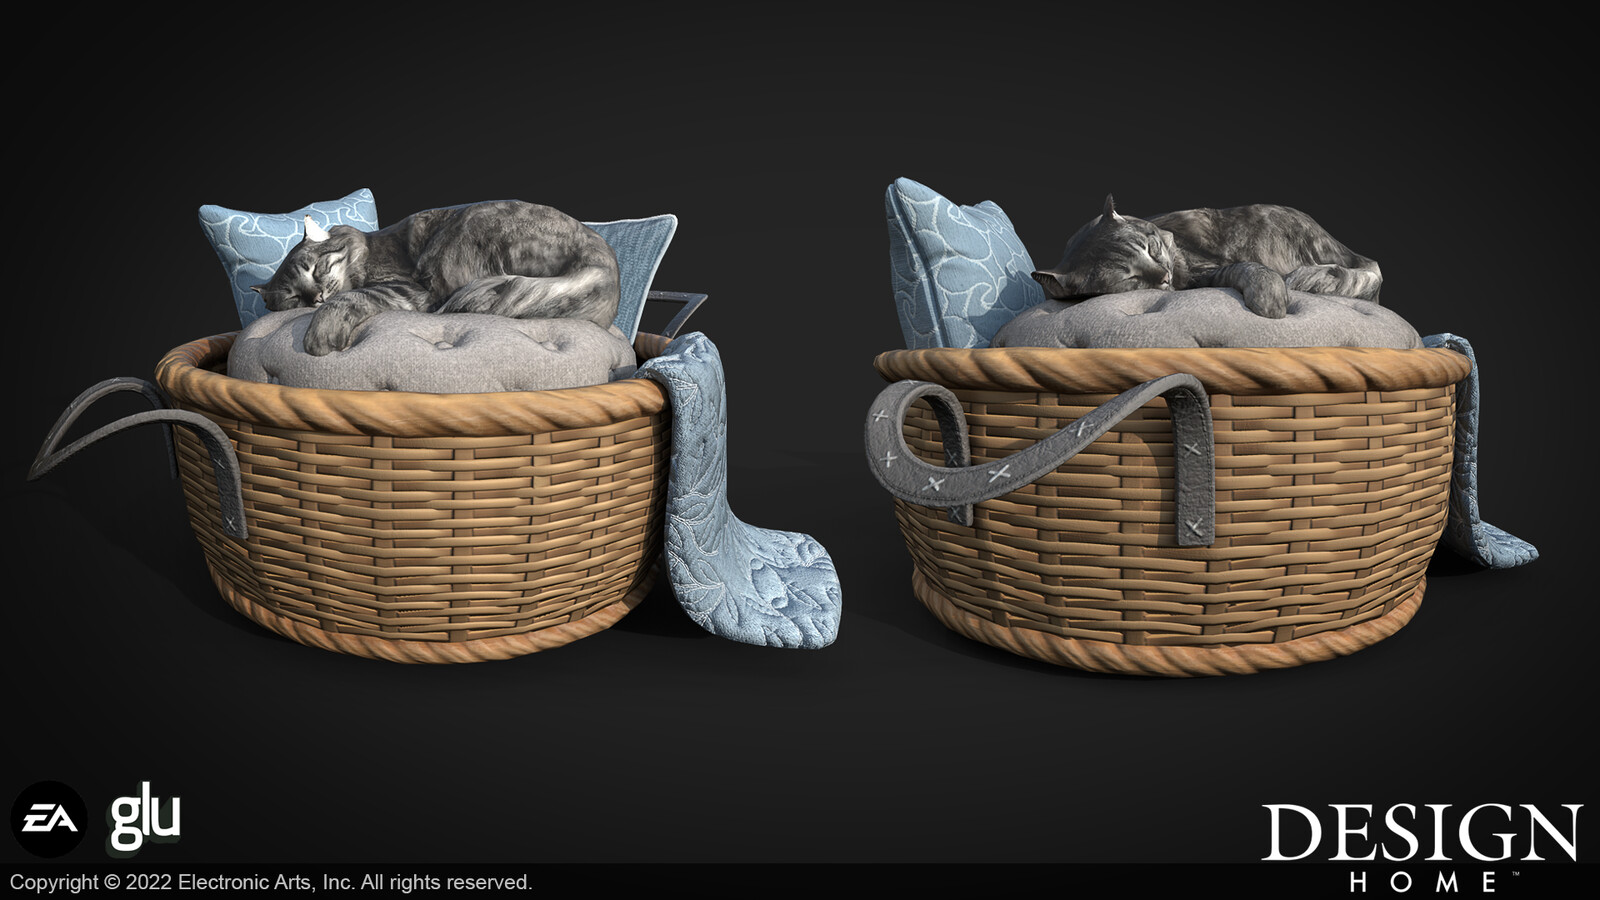 The cat model has based on a scan with texture modification and paints over.